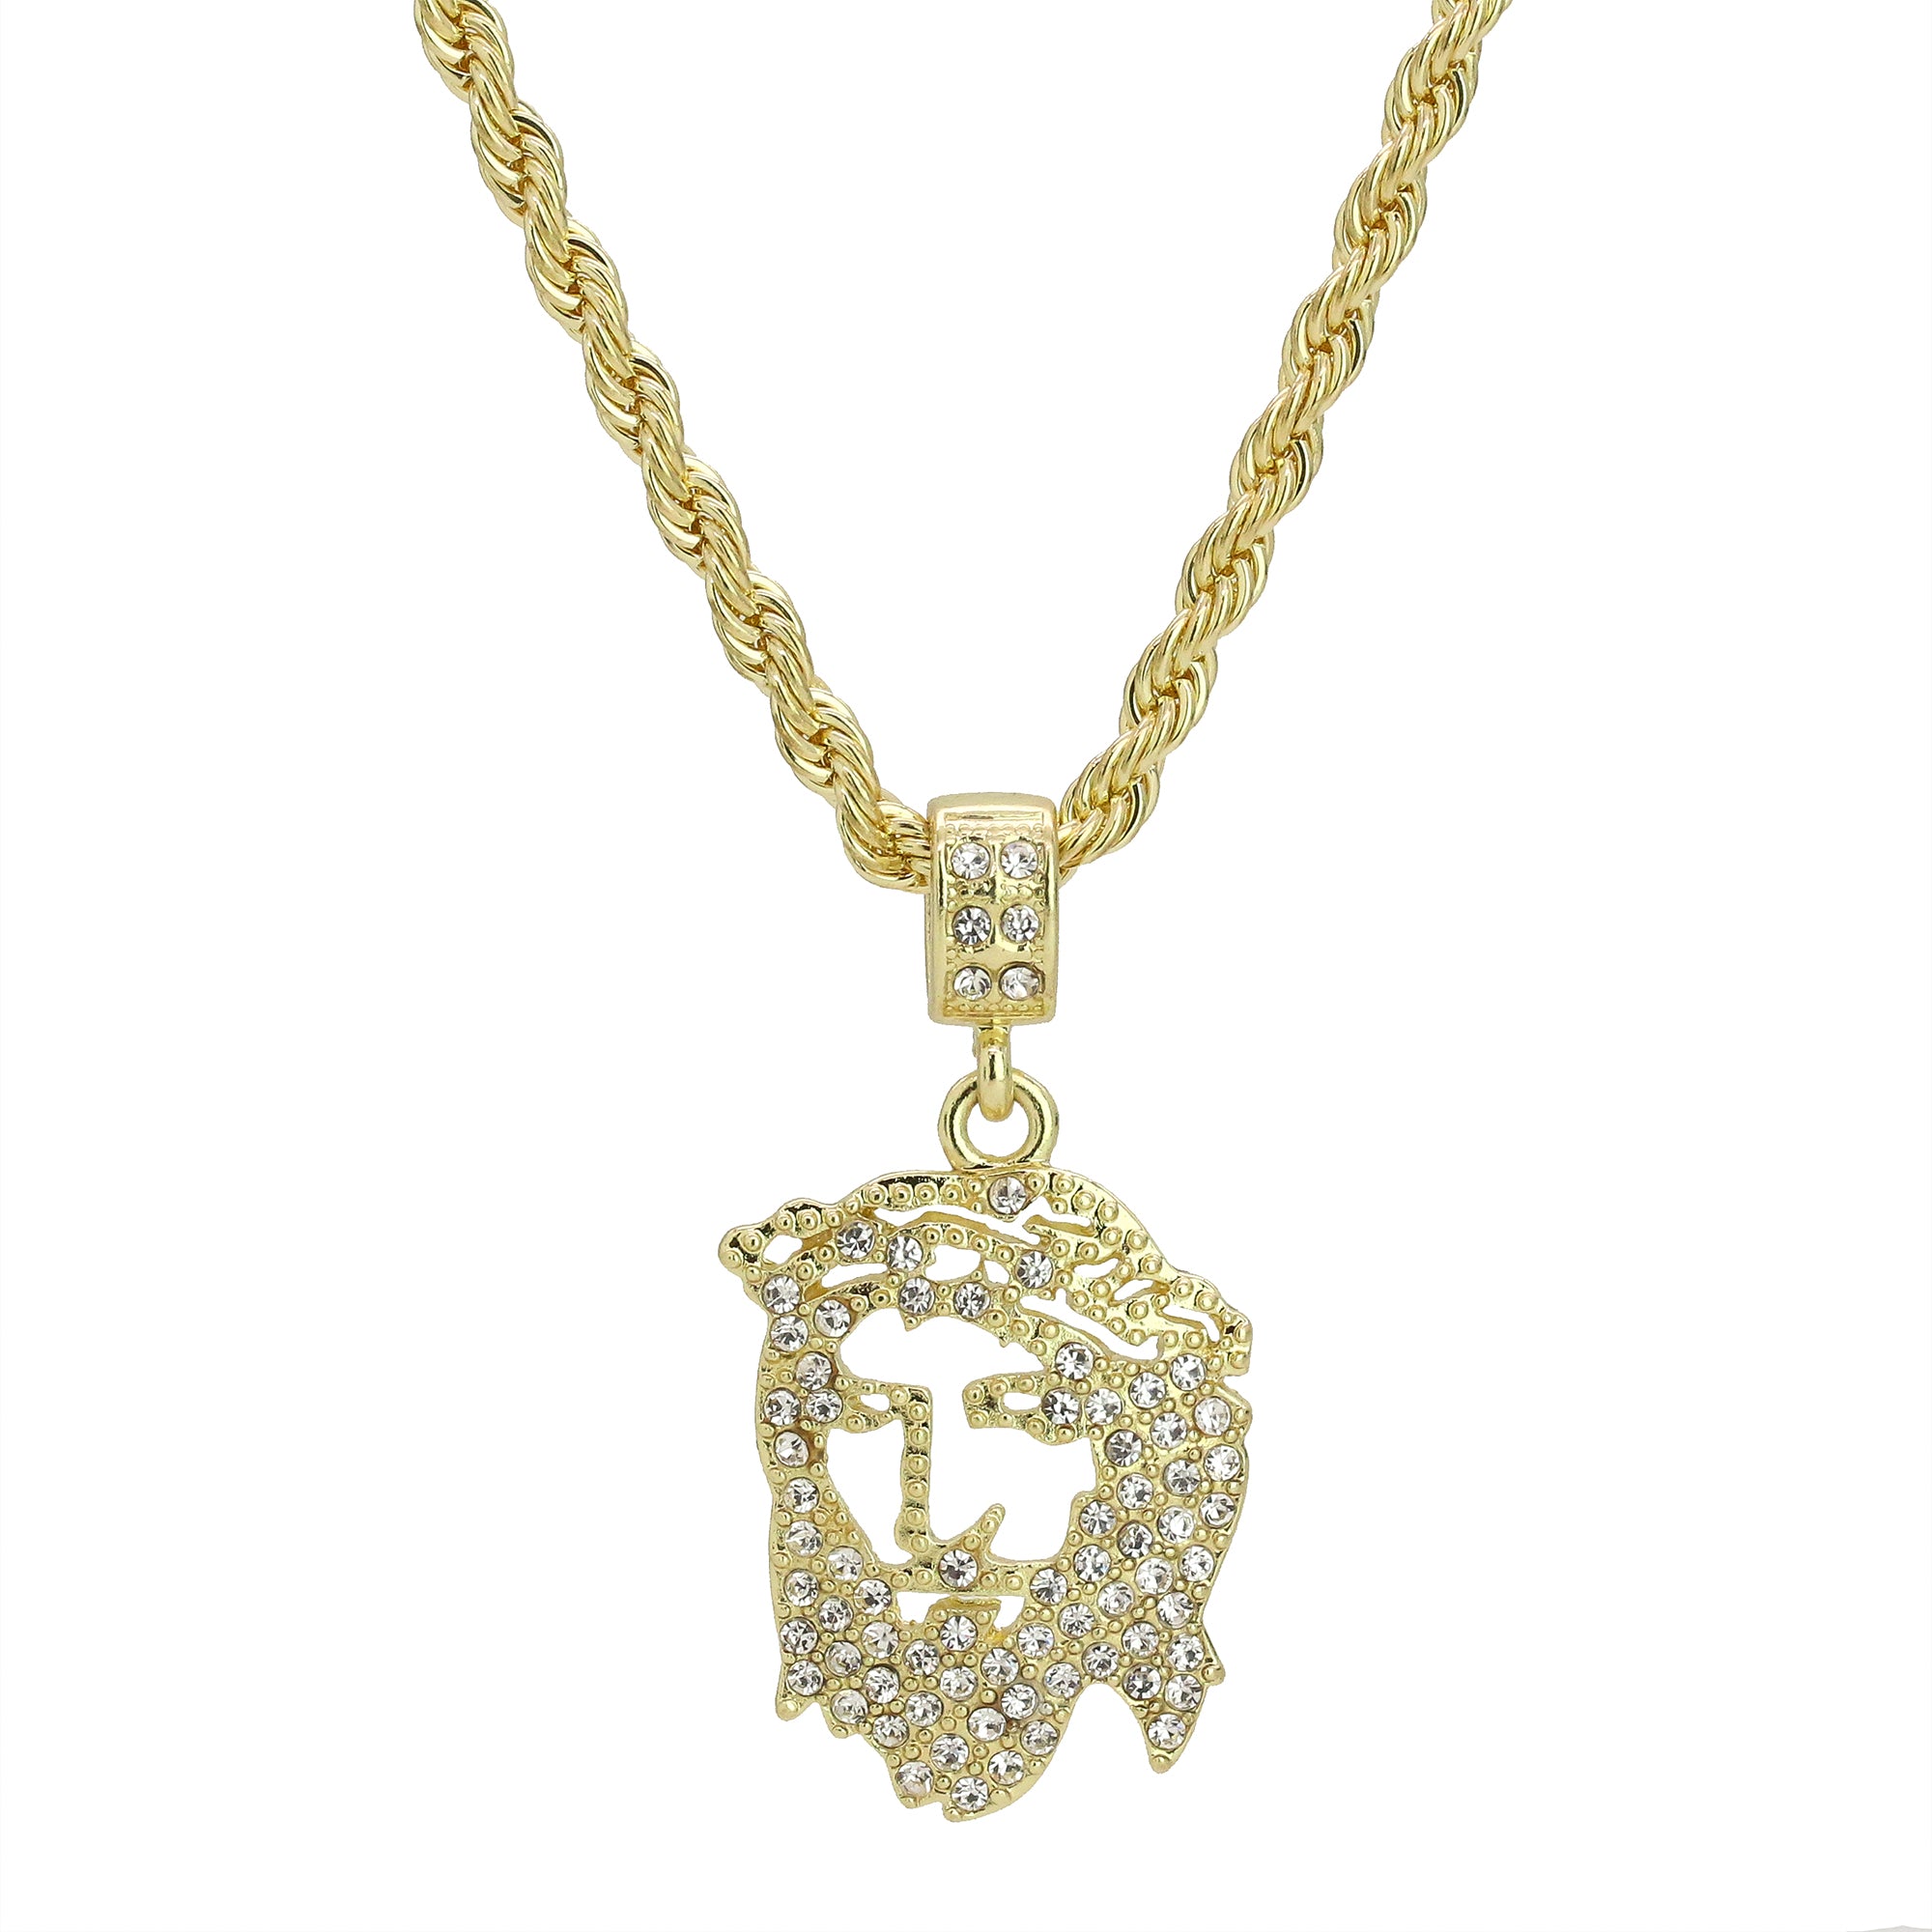 Fully Cz Hollow Jesus Face Pendant 24 Rope Chain Hip Hop 18k Jewelry Necklace JT